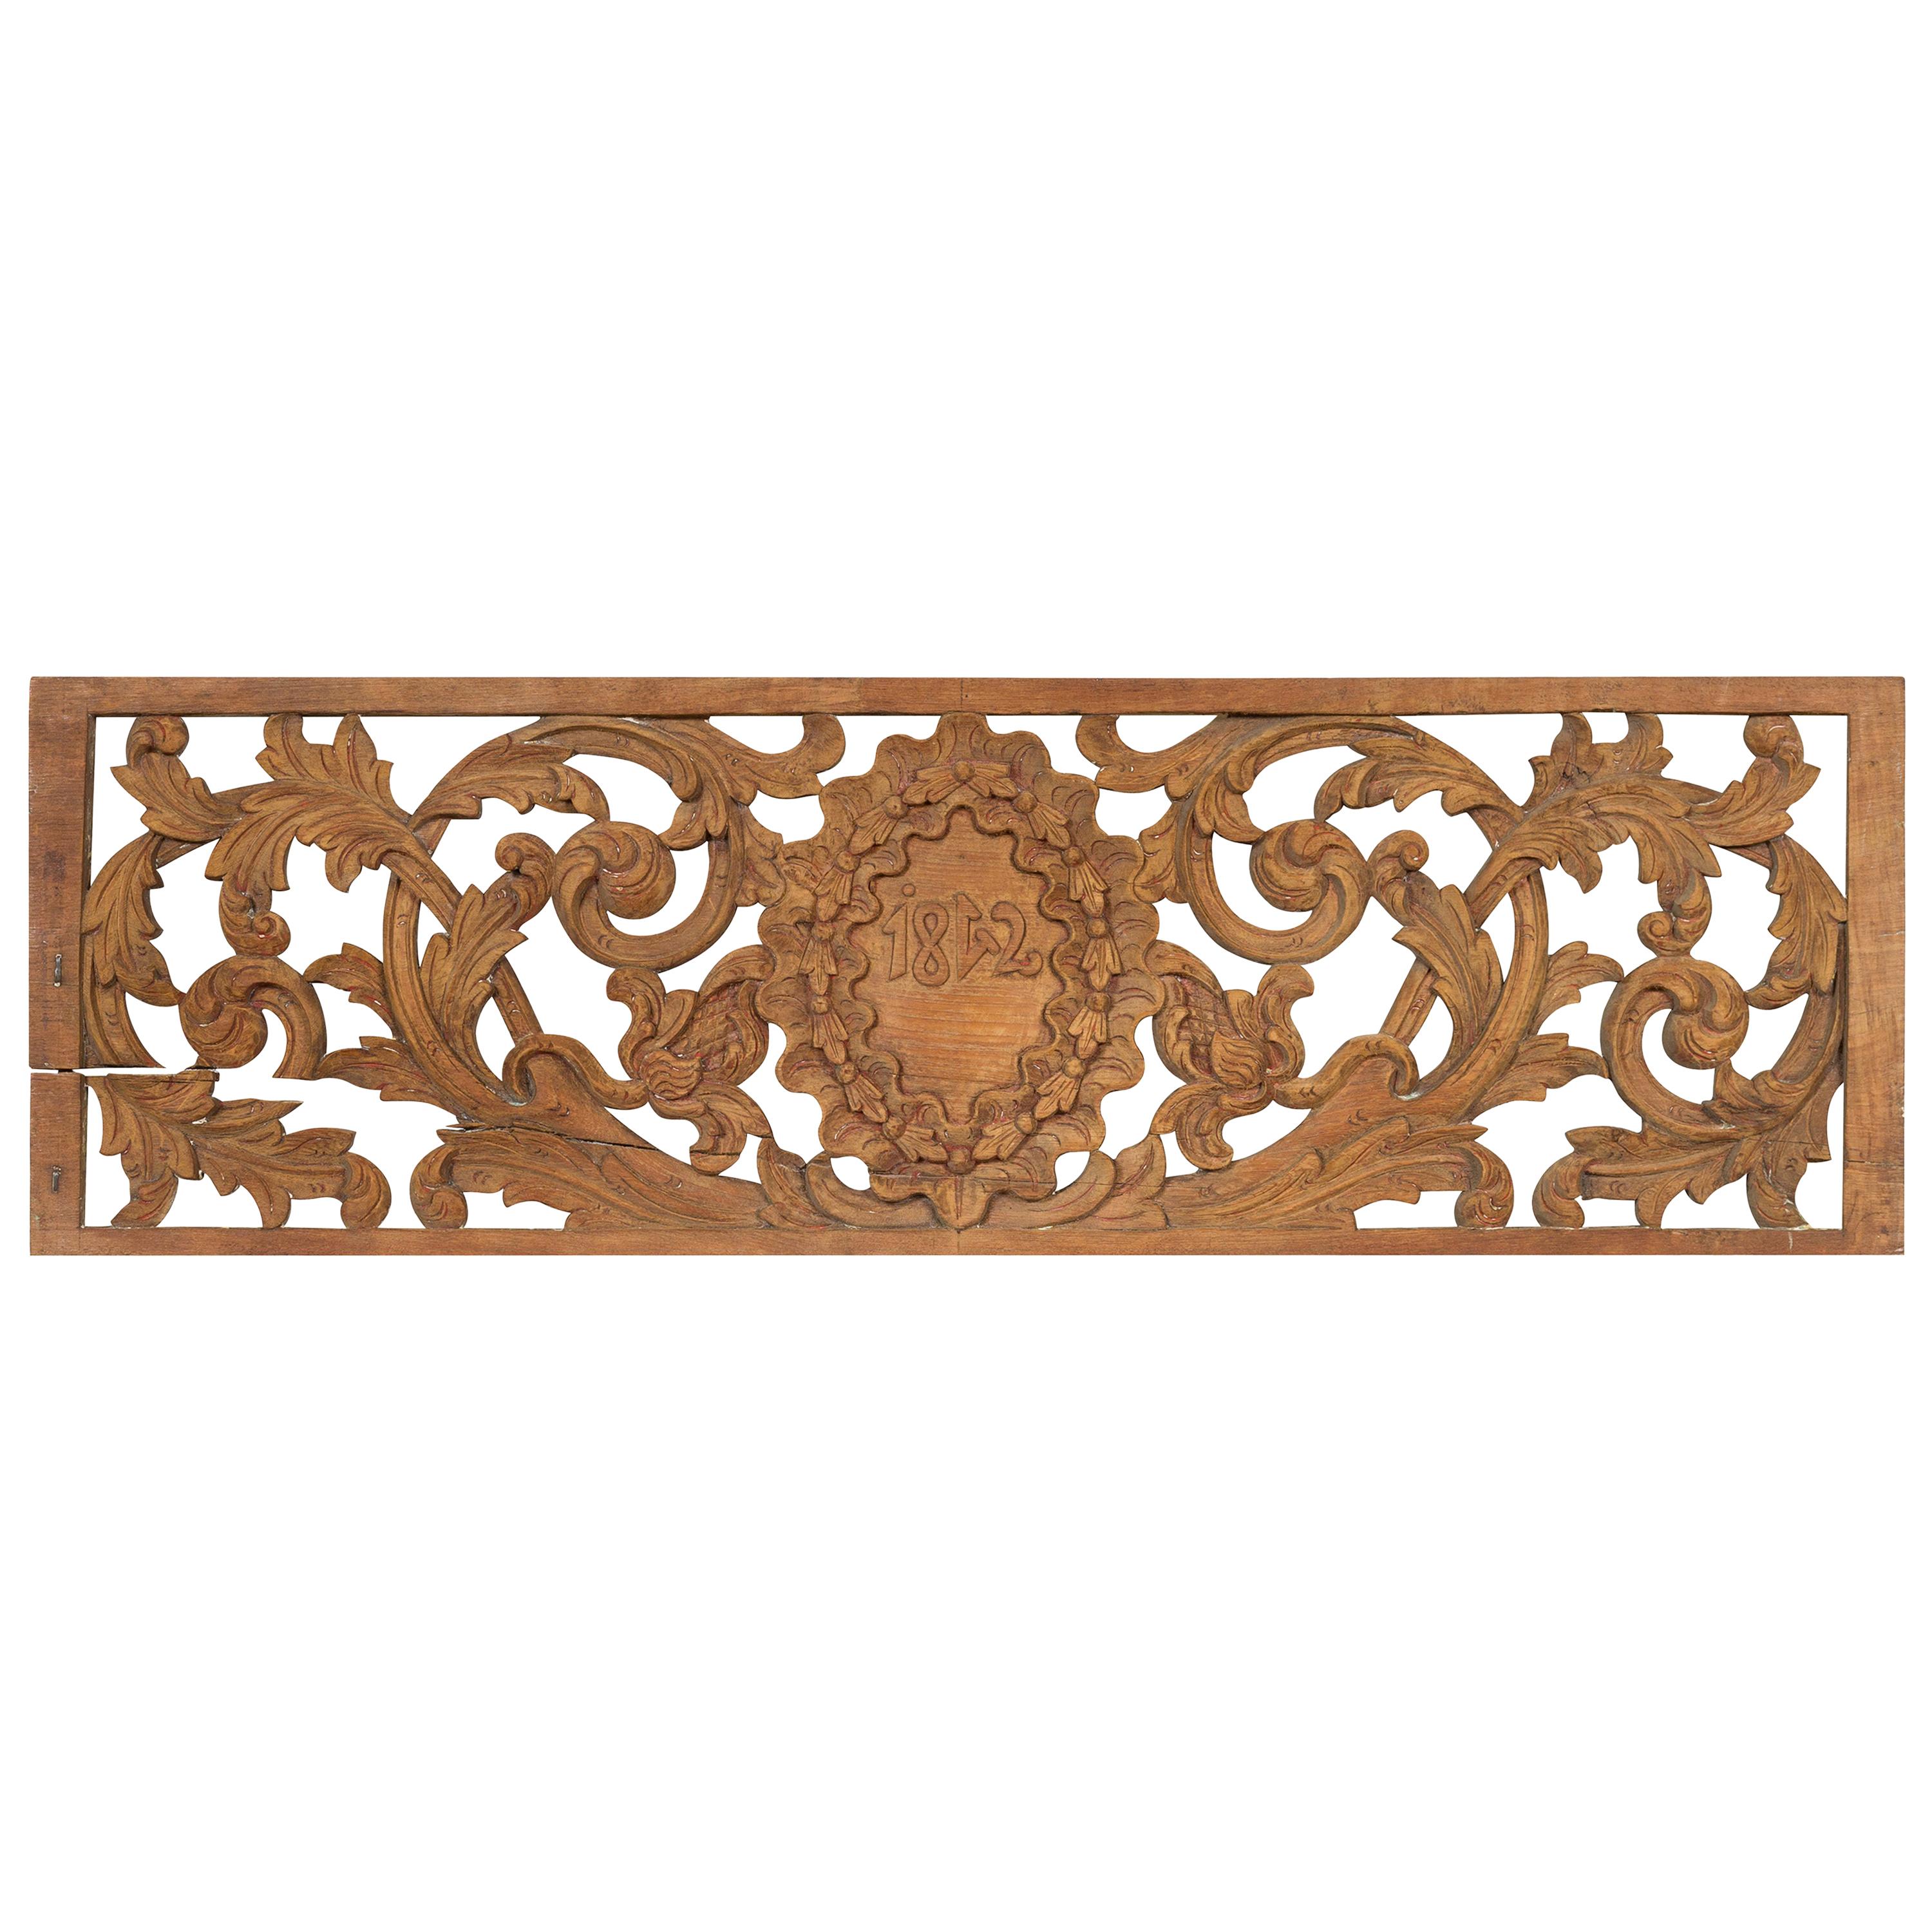 Early 19th Century Indonesian Architectural Transom Panel with Carved Foliage